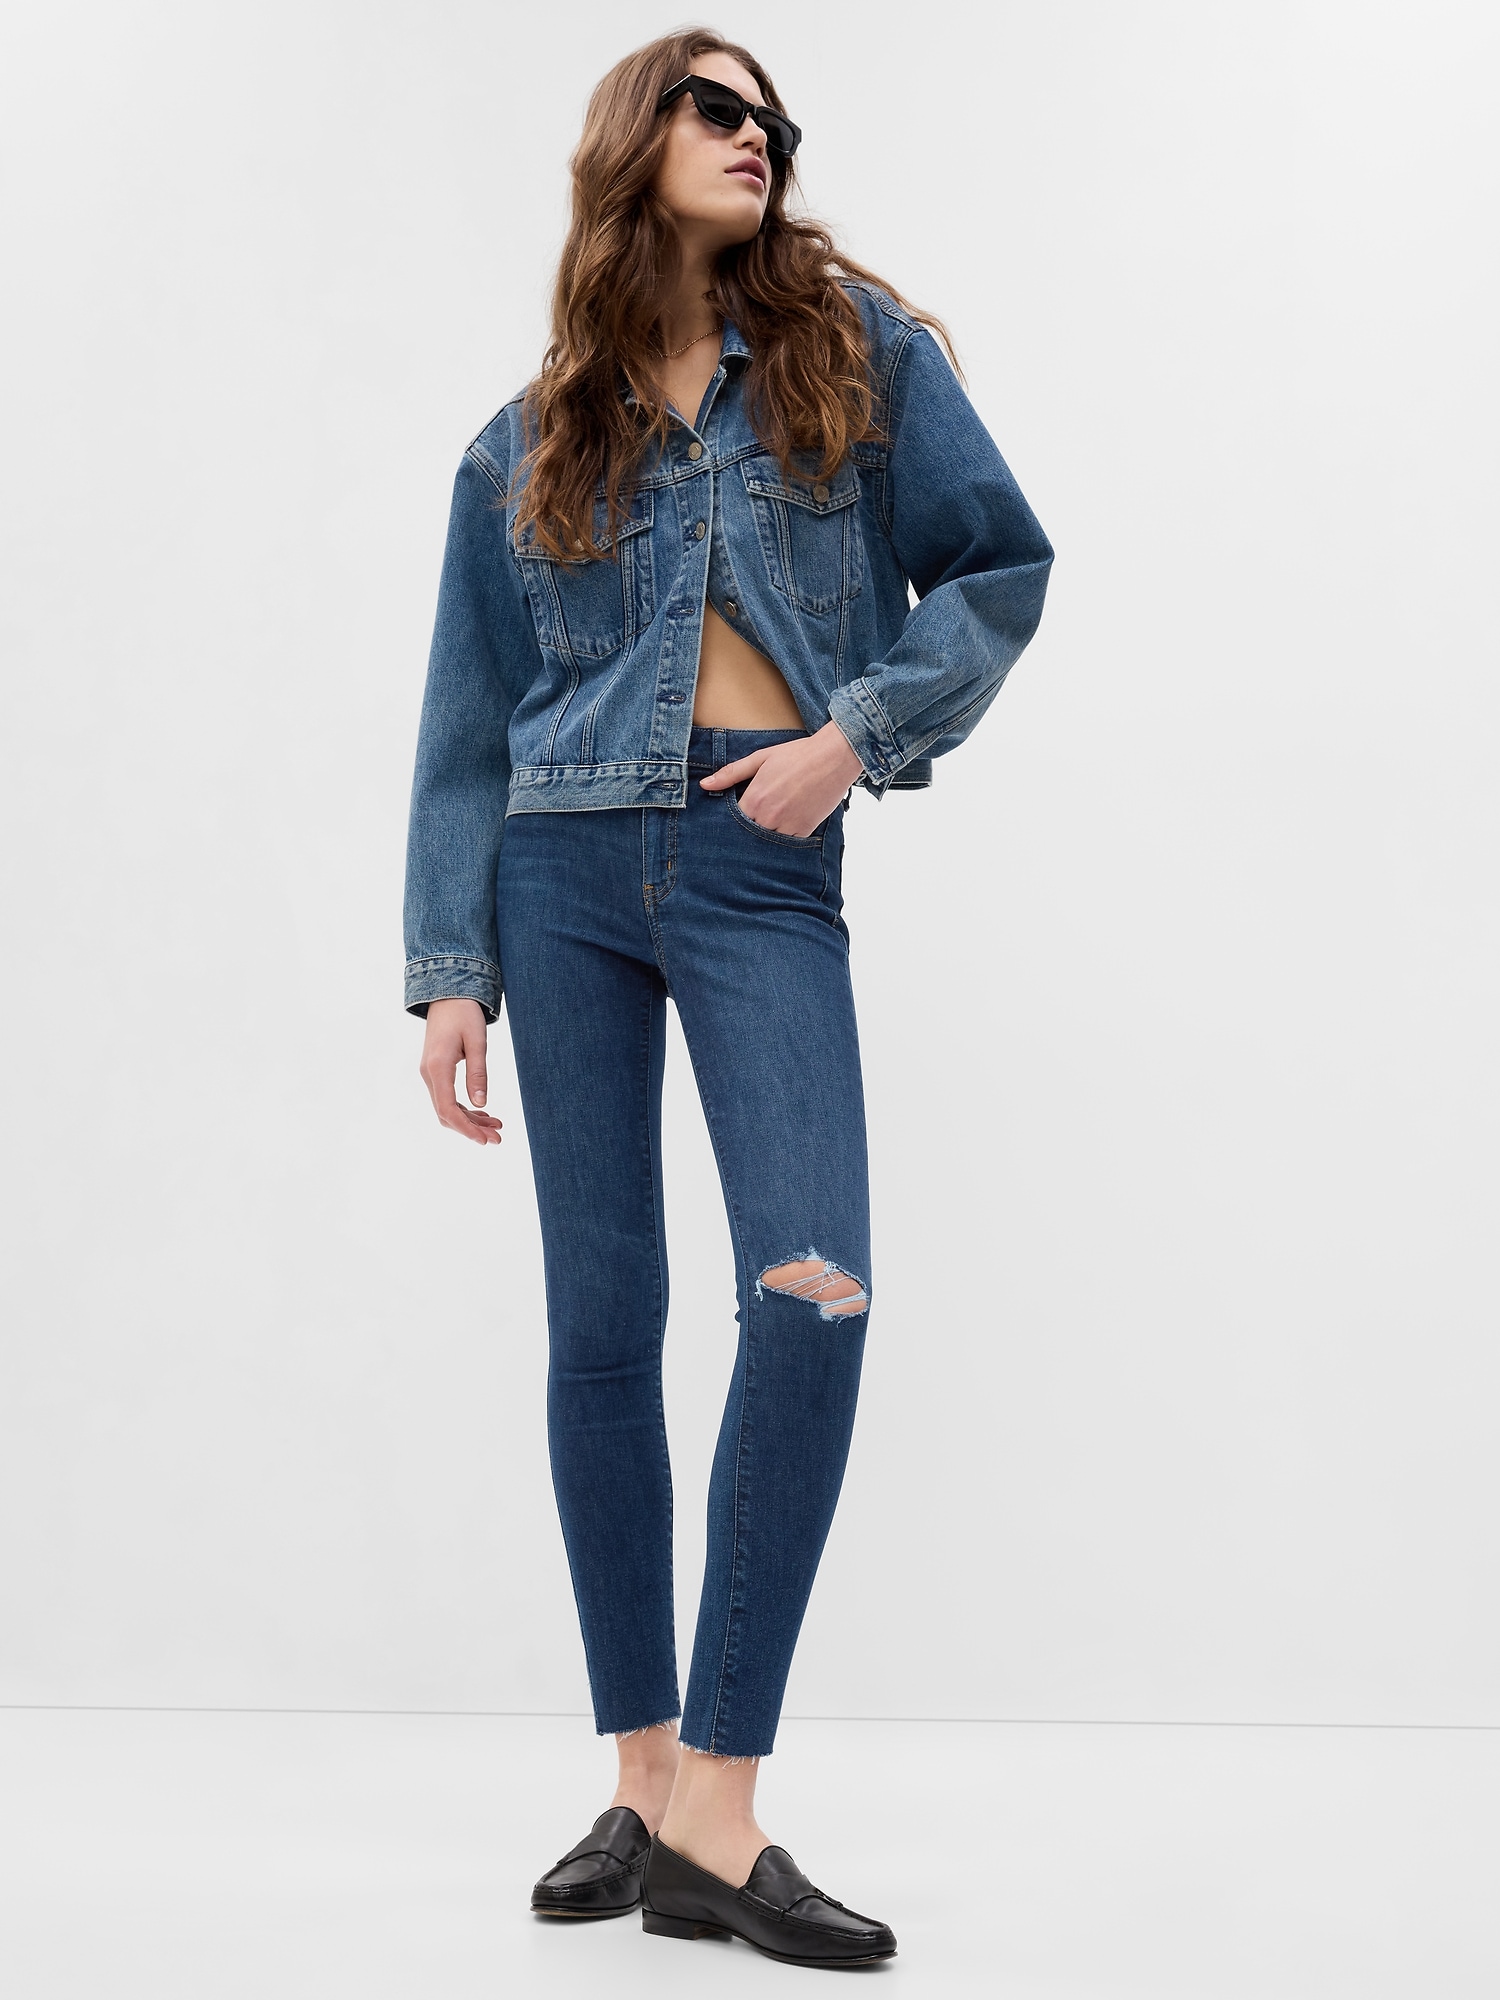 GAP, Jeans, Gap Mid Rise Universal Legging Jeans With Washwell Size Long